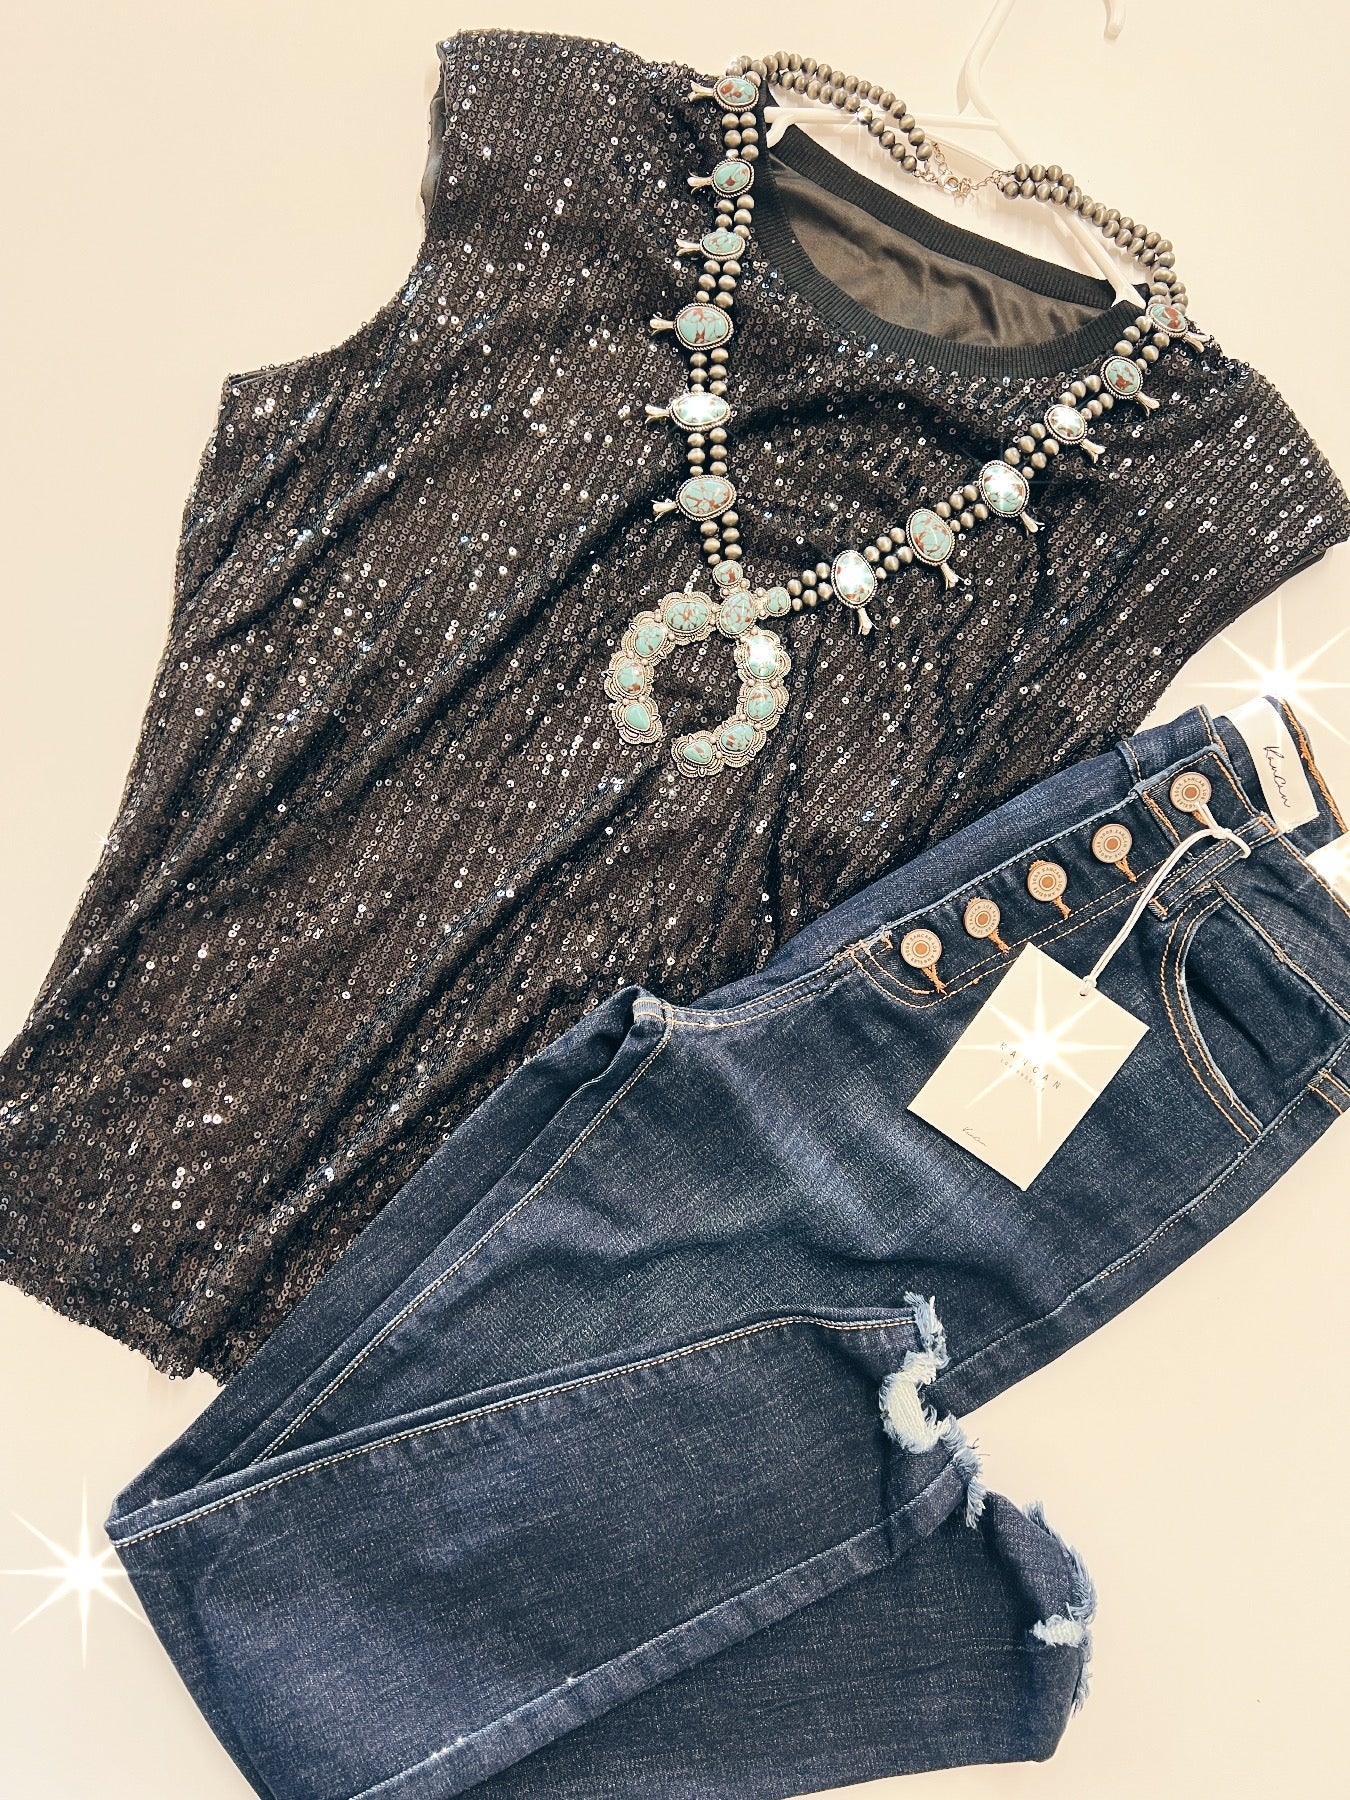 “Ladies Night Out” Sleeveless Sequin Top